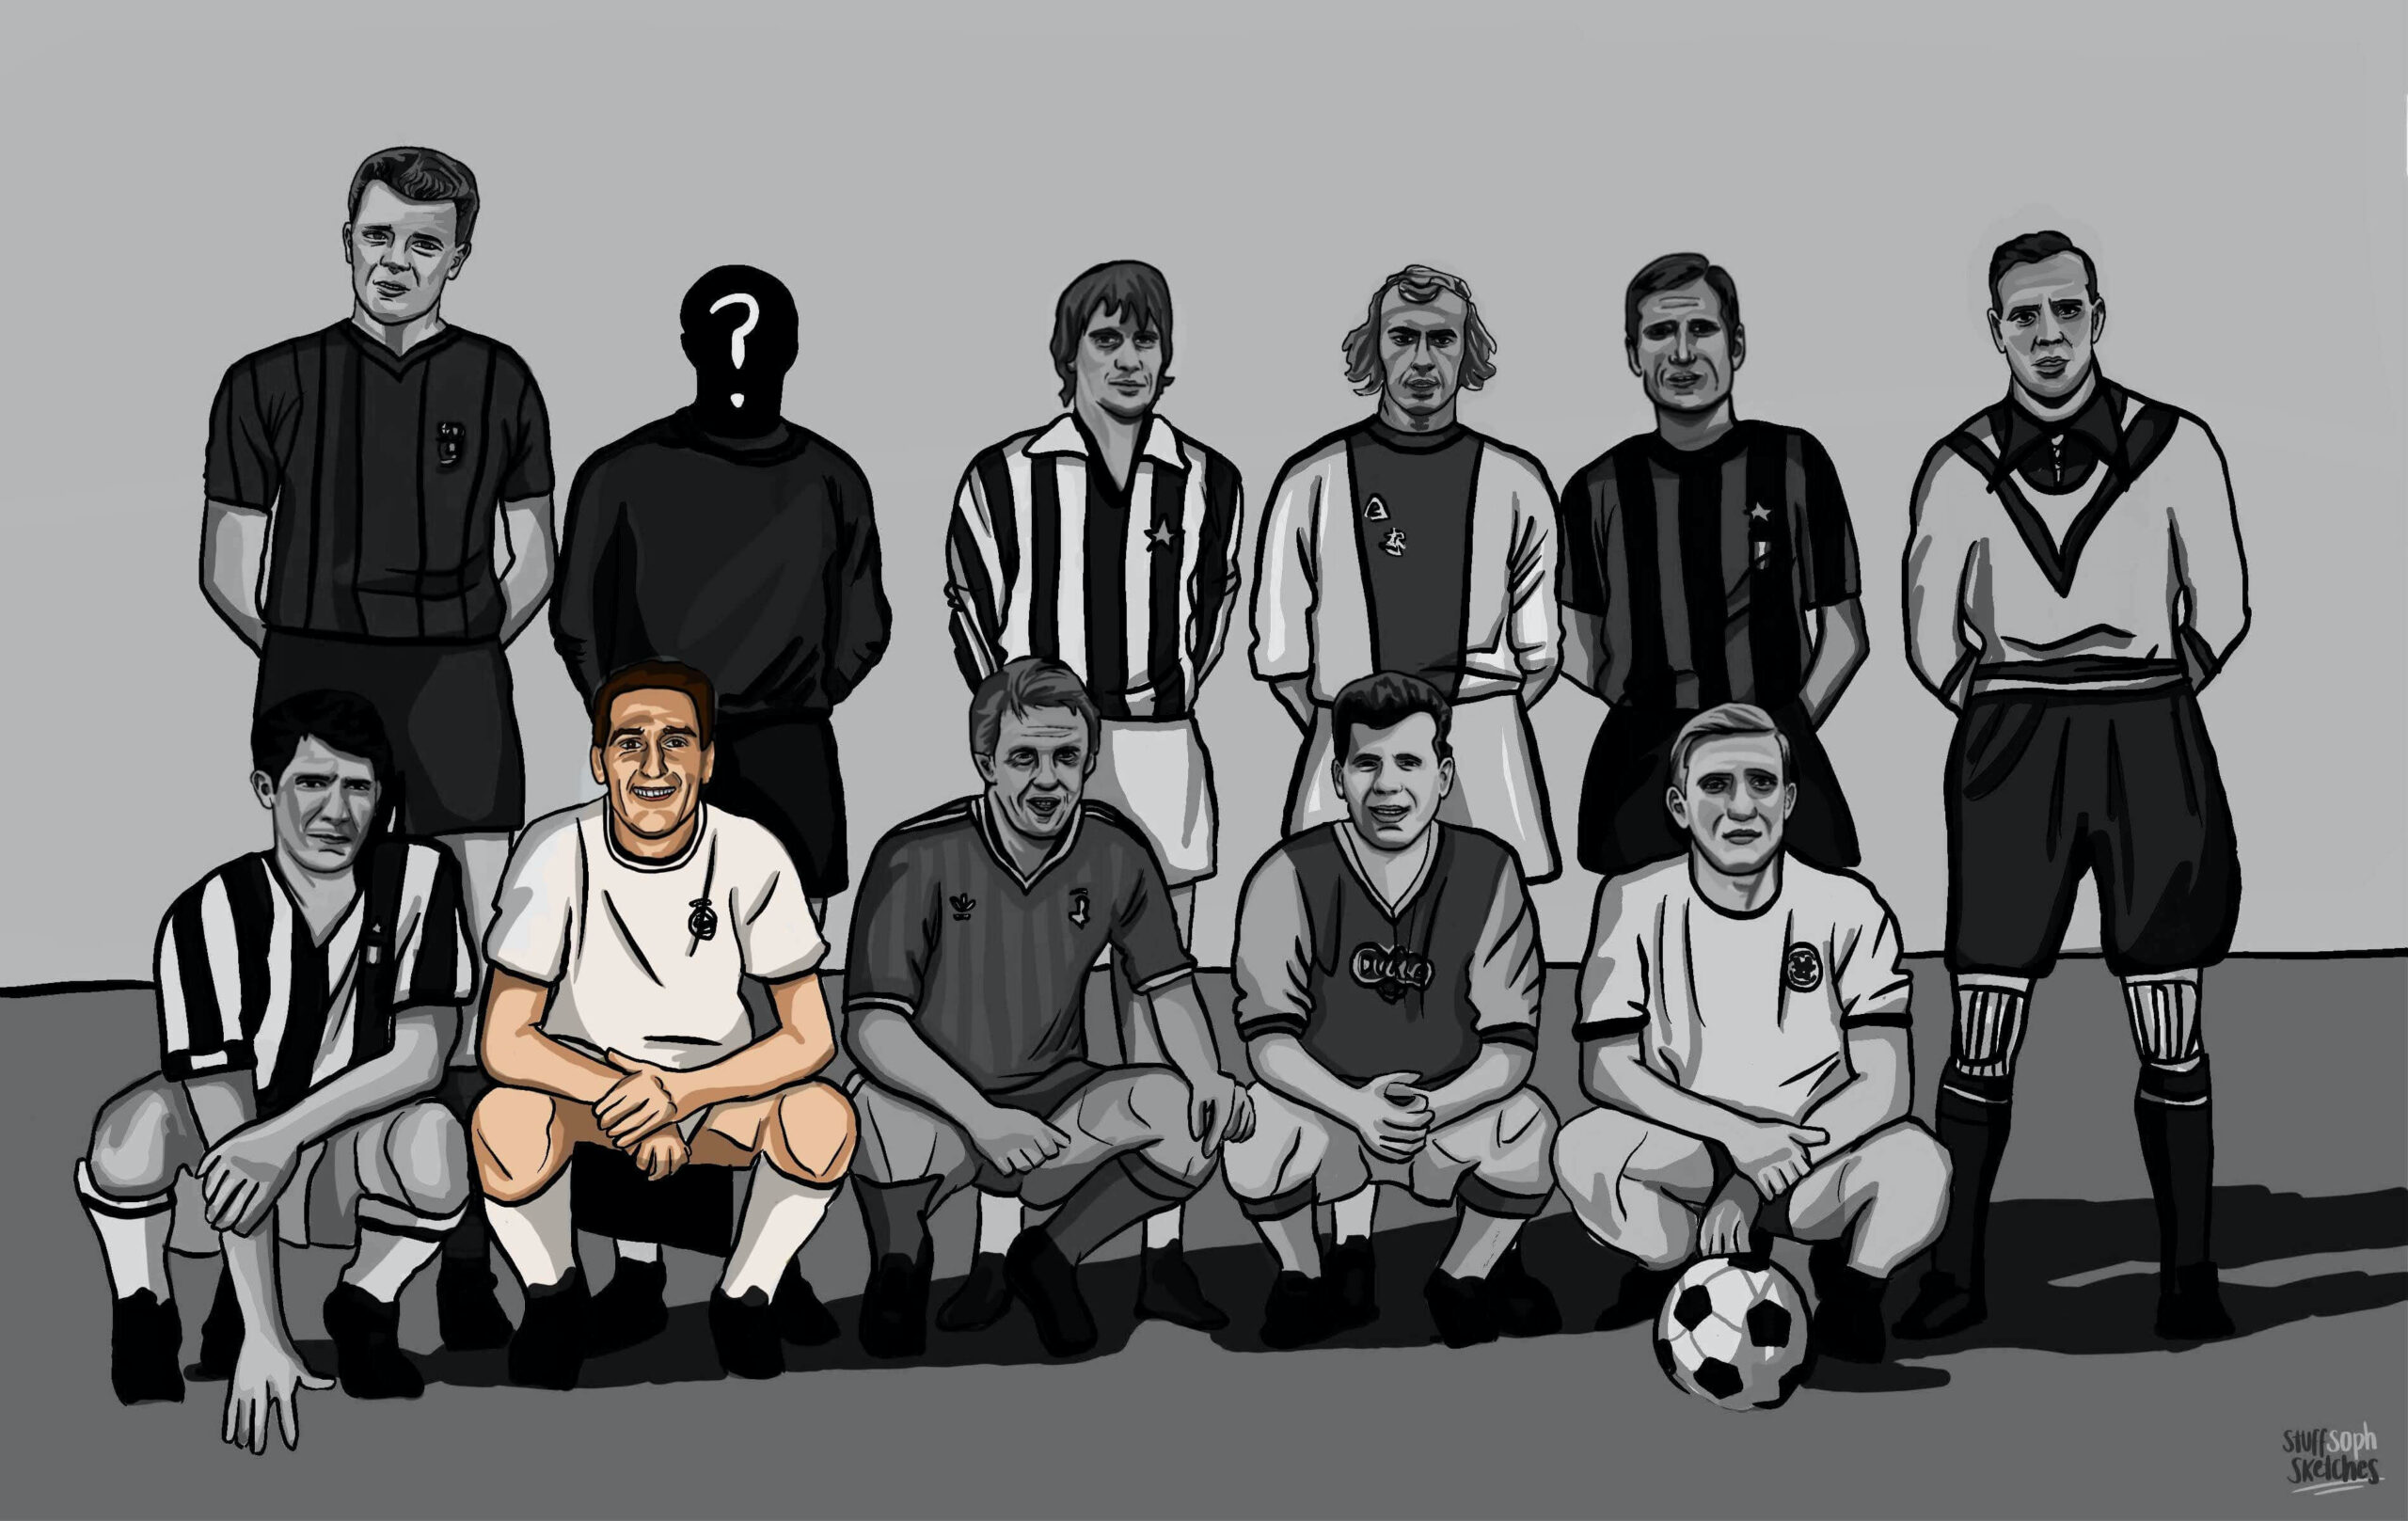 Francisco Gento in colour, amongst the forgotten eleven lineup in black and white